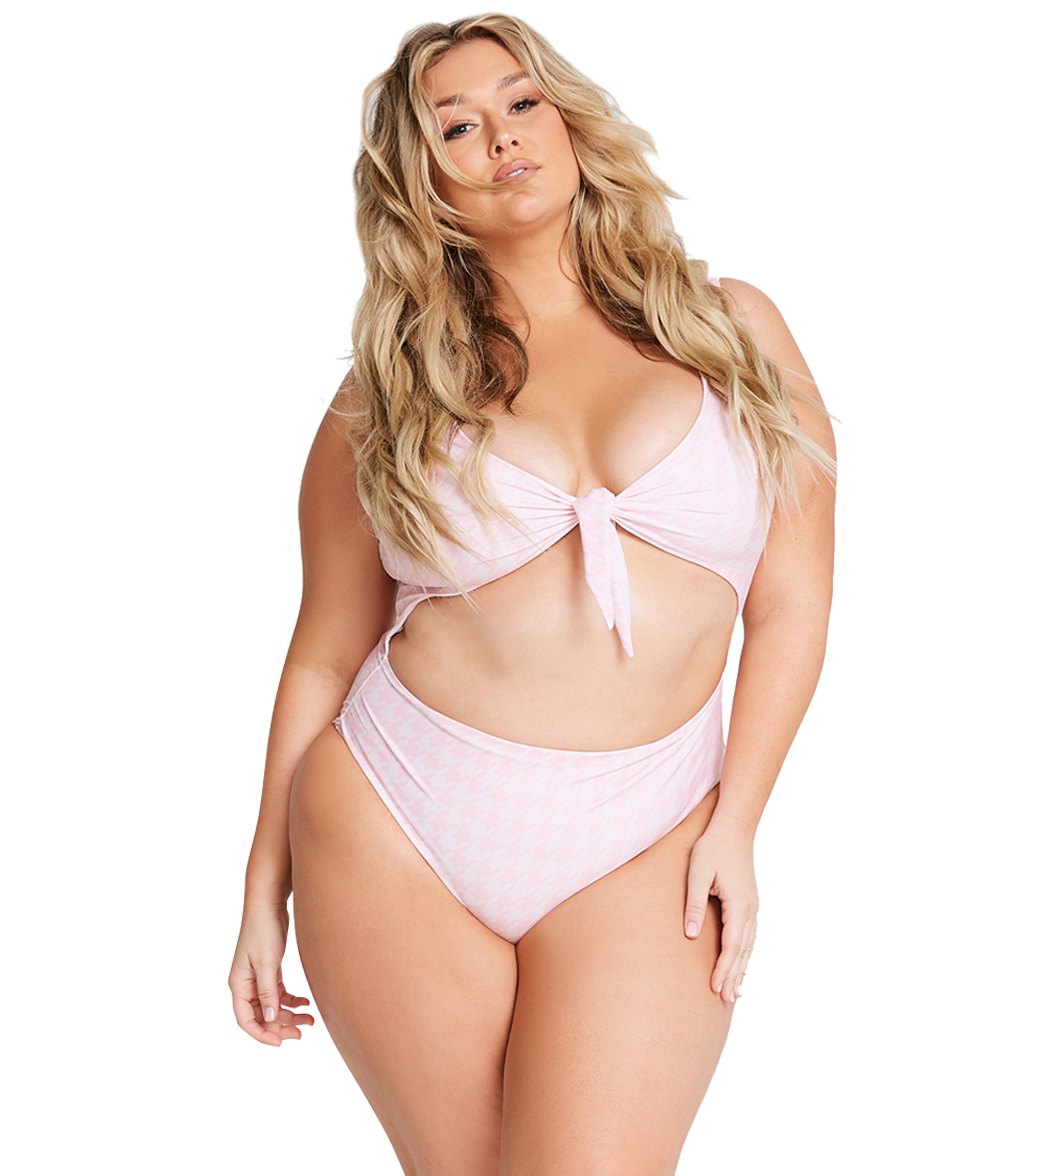 Alpine Butterfly Plus Size Pink Houndstooth Riviera One Piece Swimsuit - 3X - Swimoutlet.com